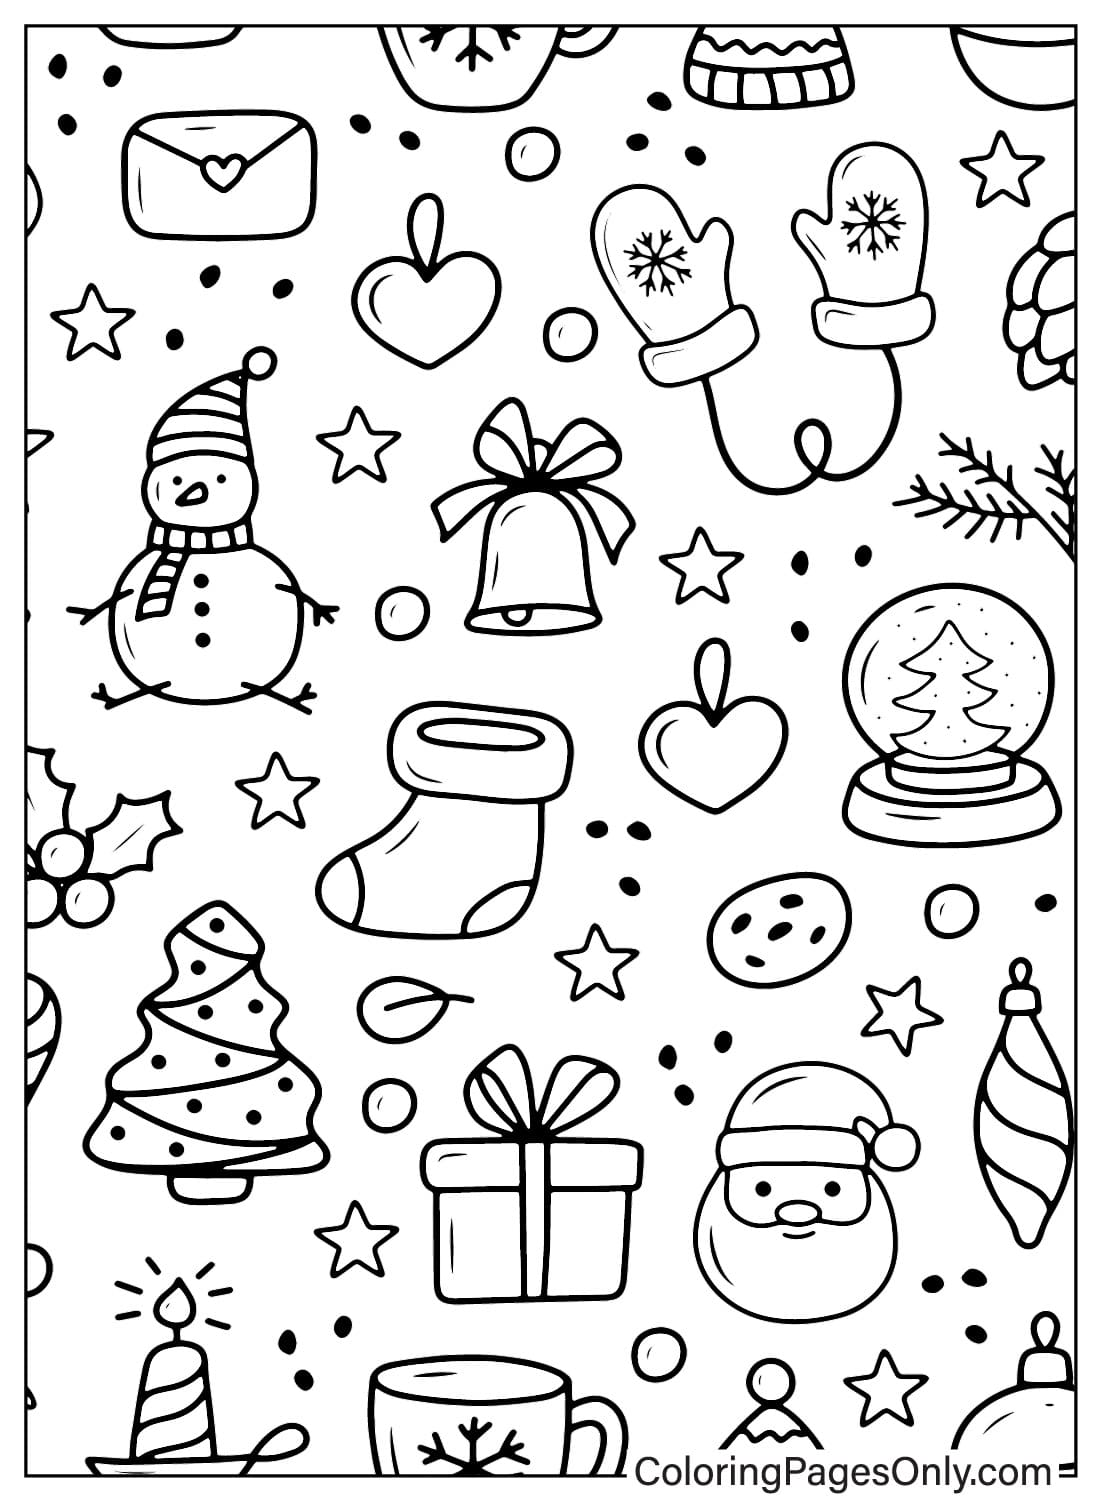 Coloring Page Christmas Pattern from Christmas Pattern